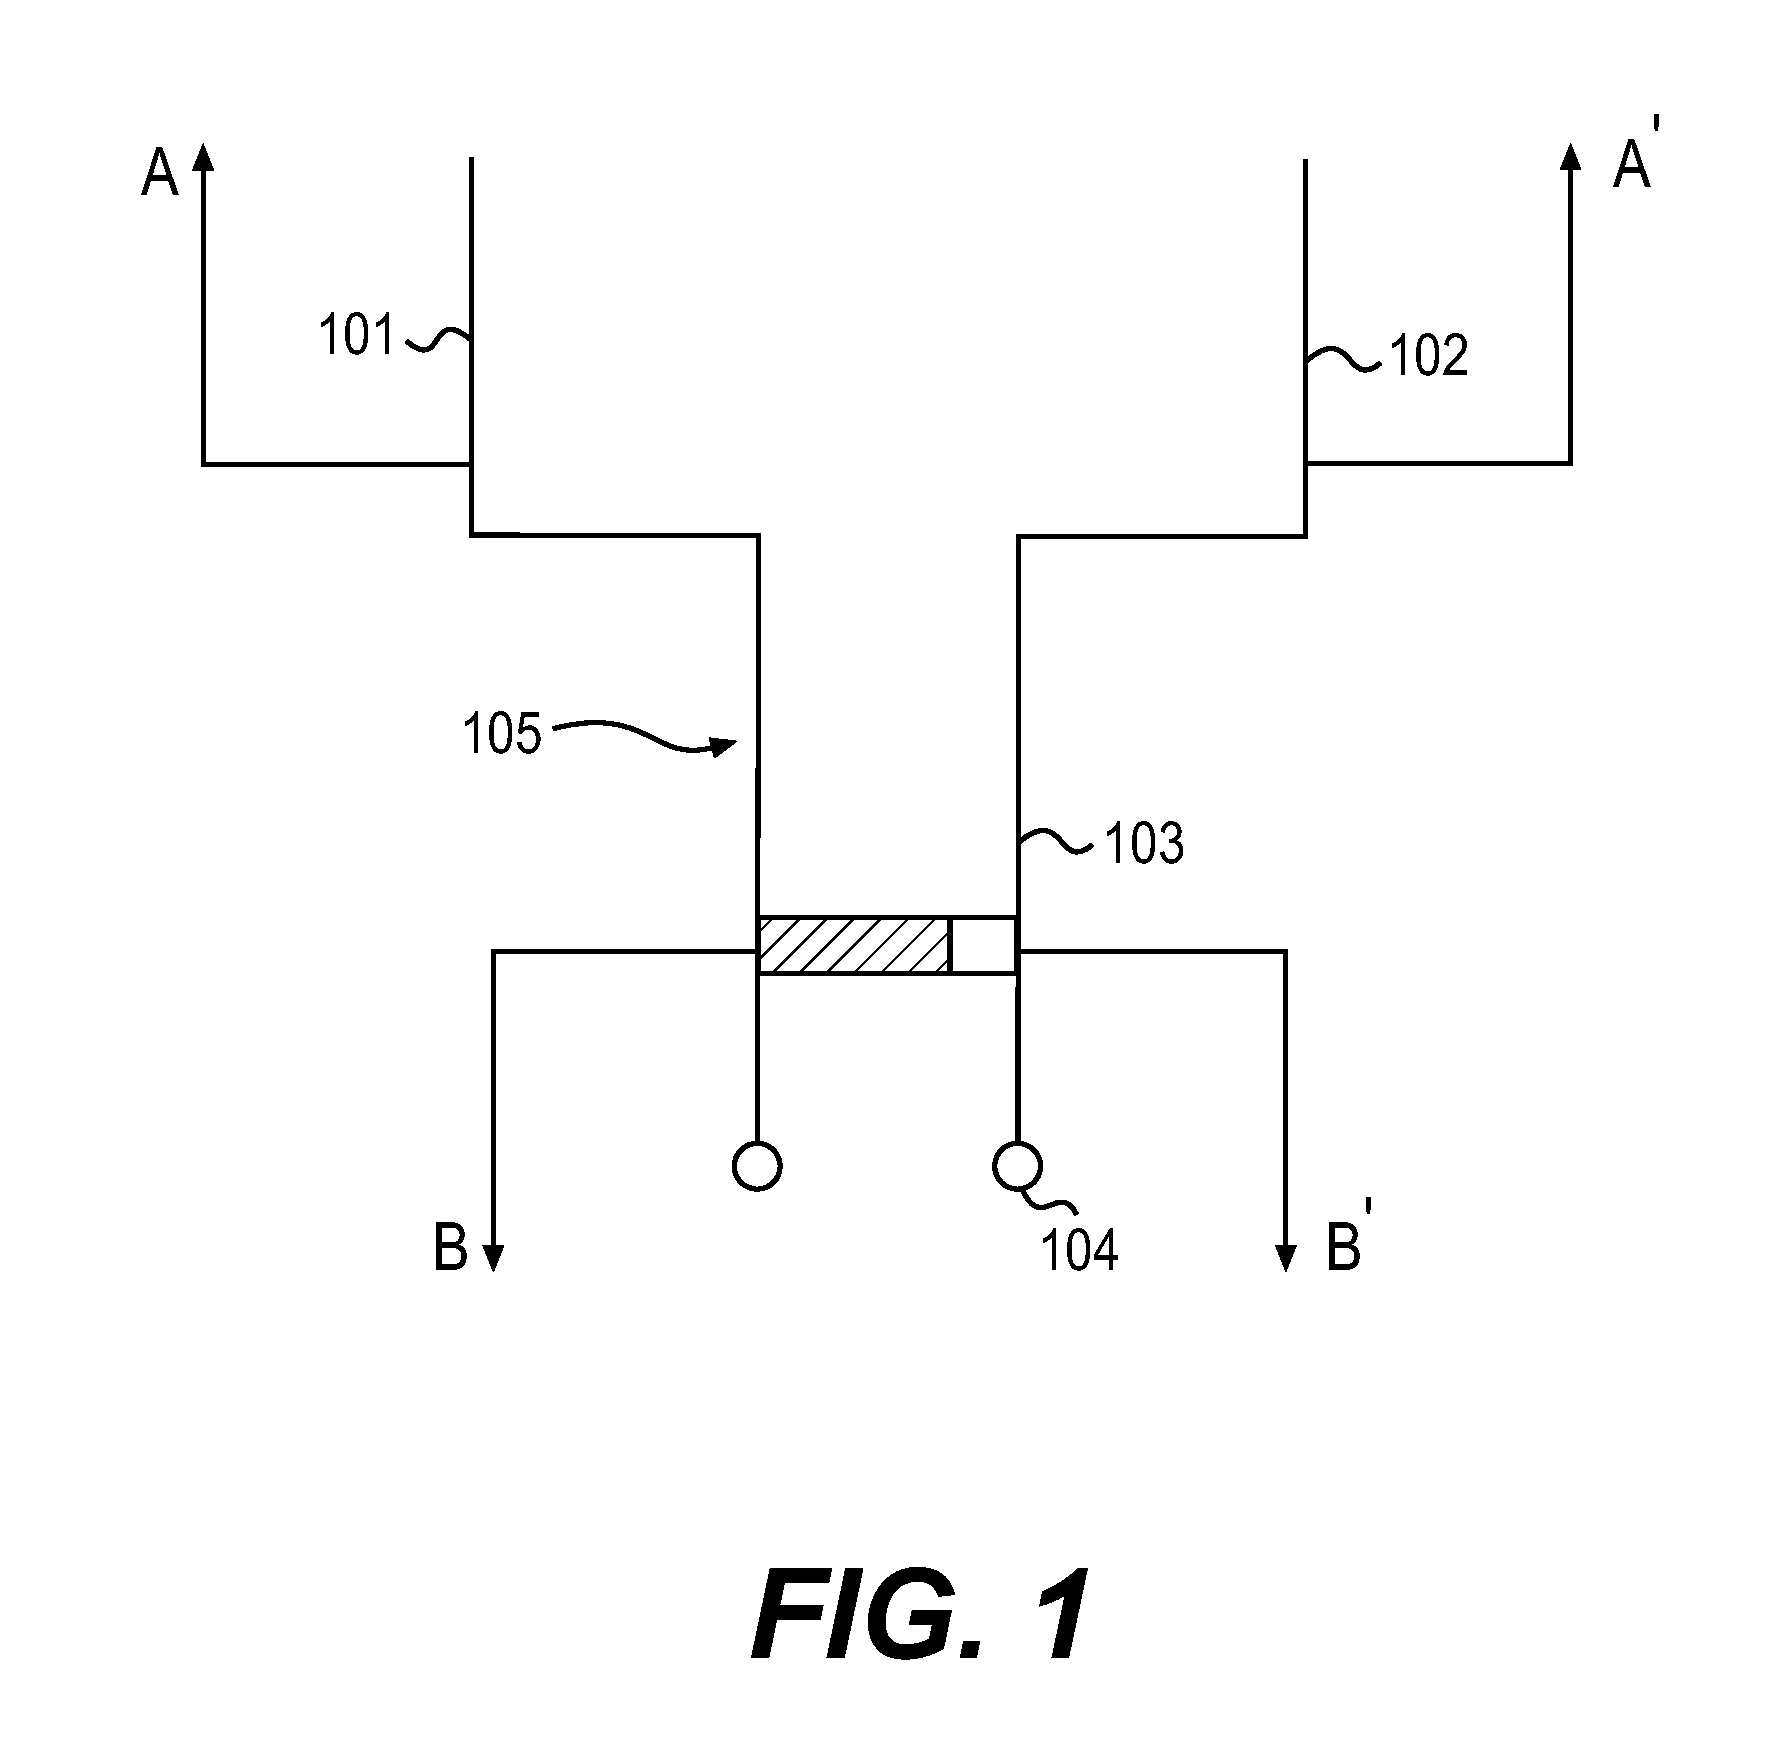 System and Method for Converting Electromagnetic Radiation to Electrical Energy